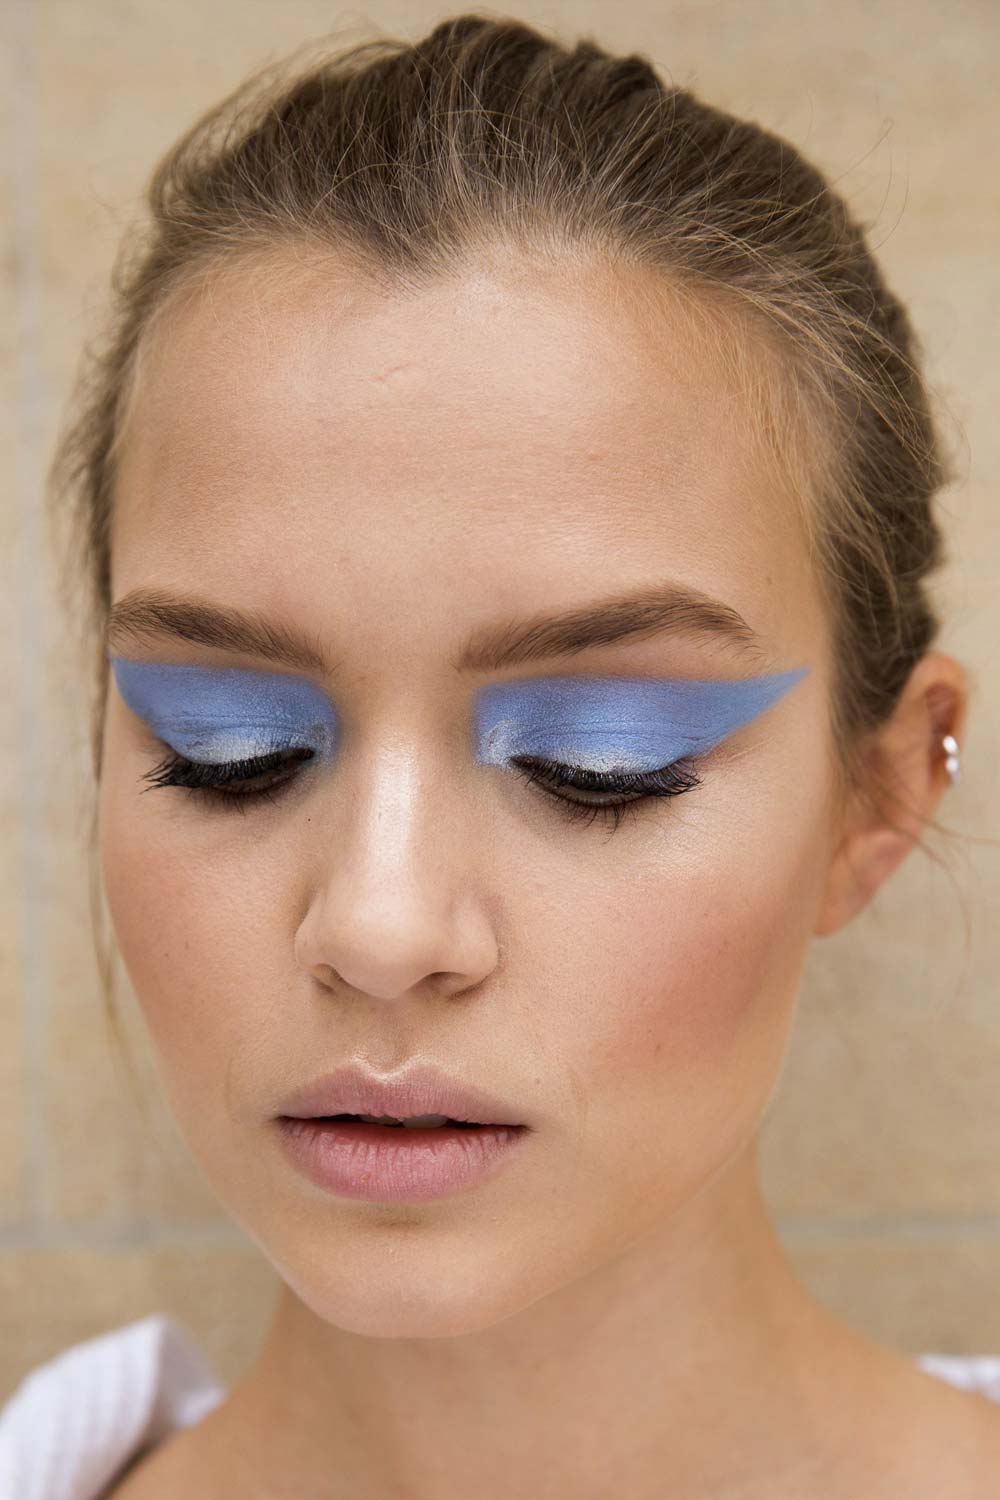 icy-blue-eyeshadow-atelier-versace-2016-couture